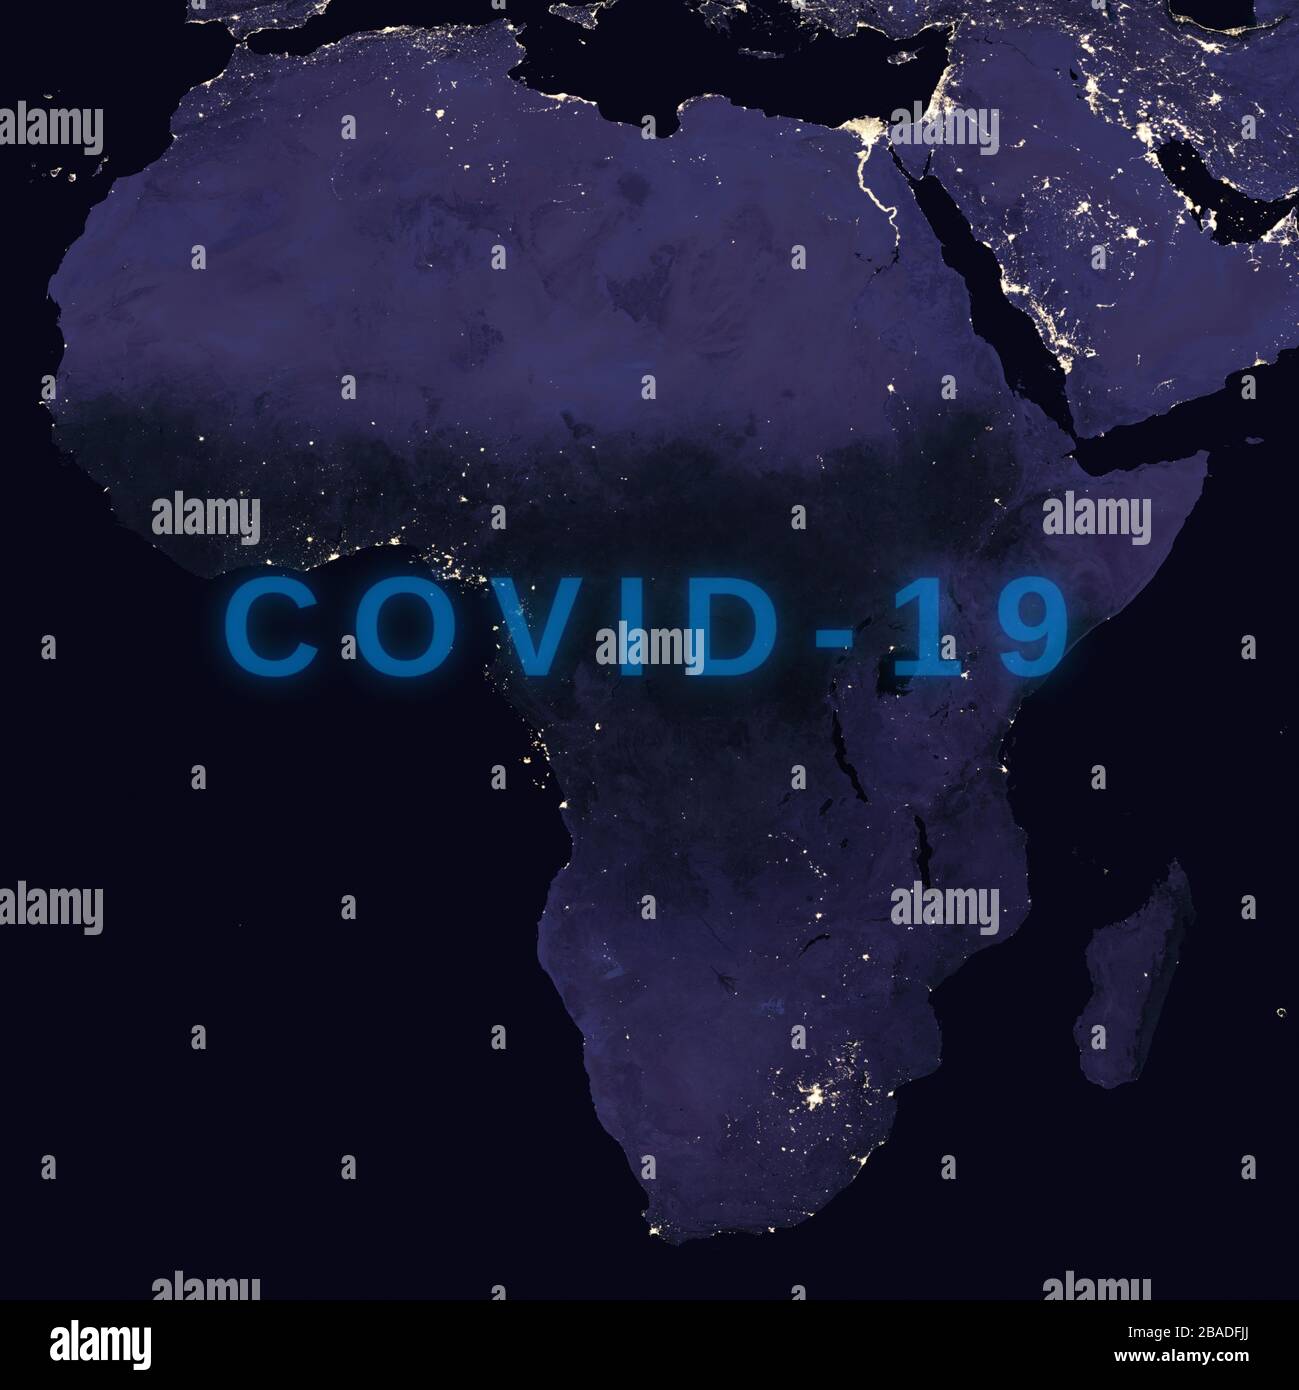 Coronavirus disease - Glowing COVID-19 sign on map of Africa - Elements of this image furnished by NASA Stock Photo